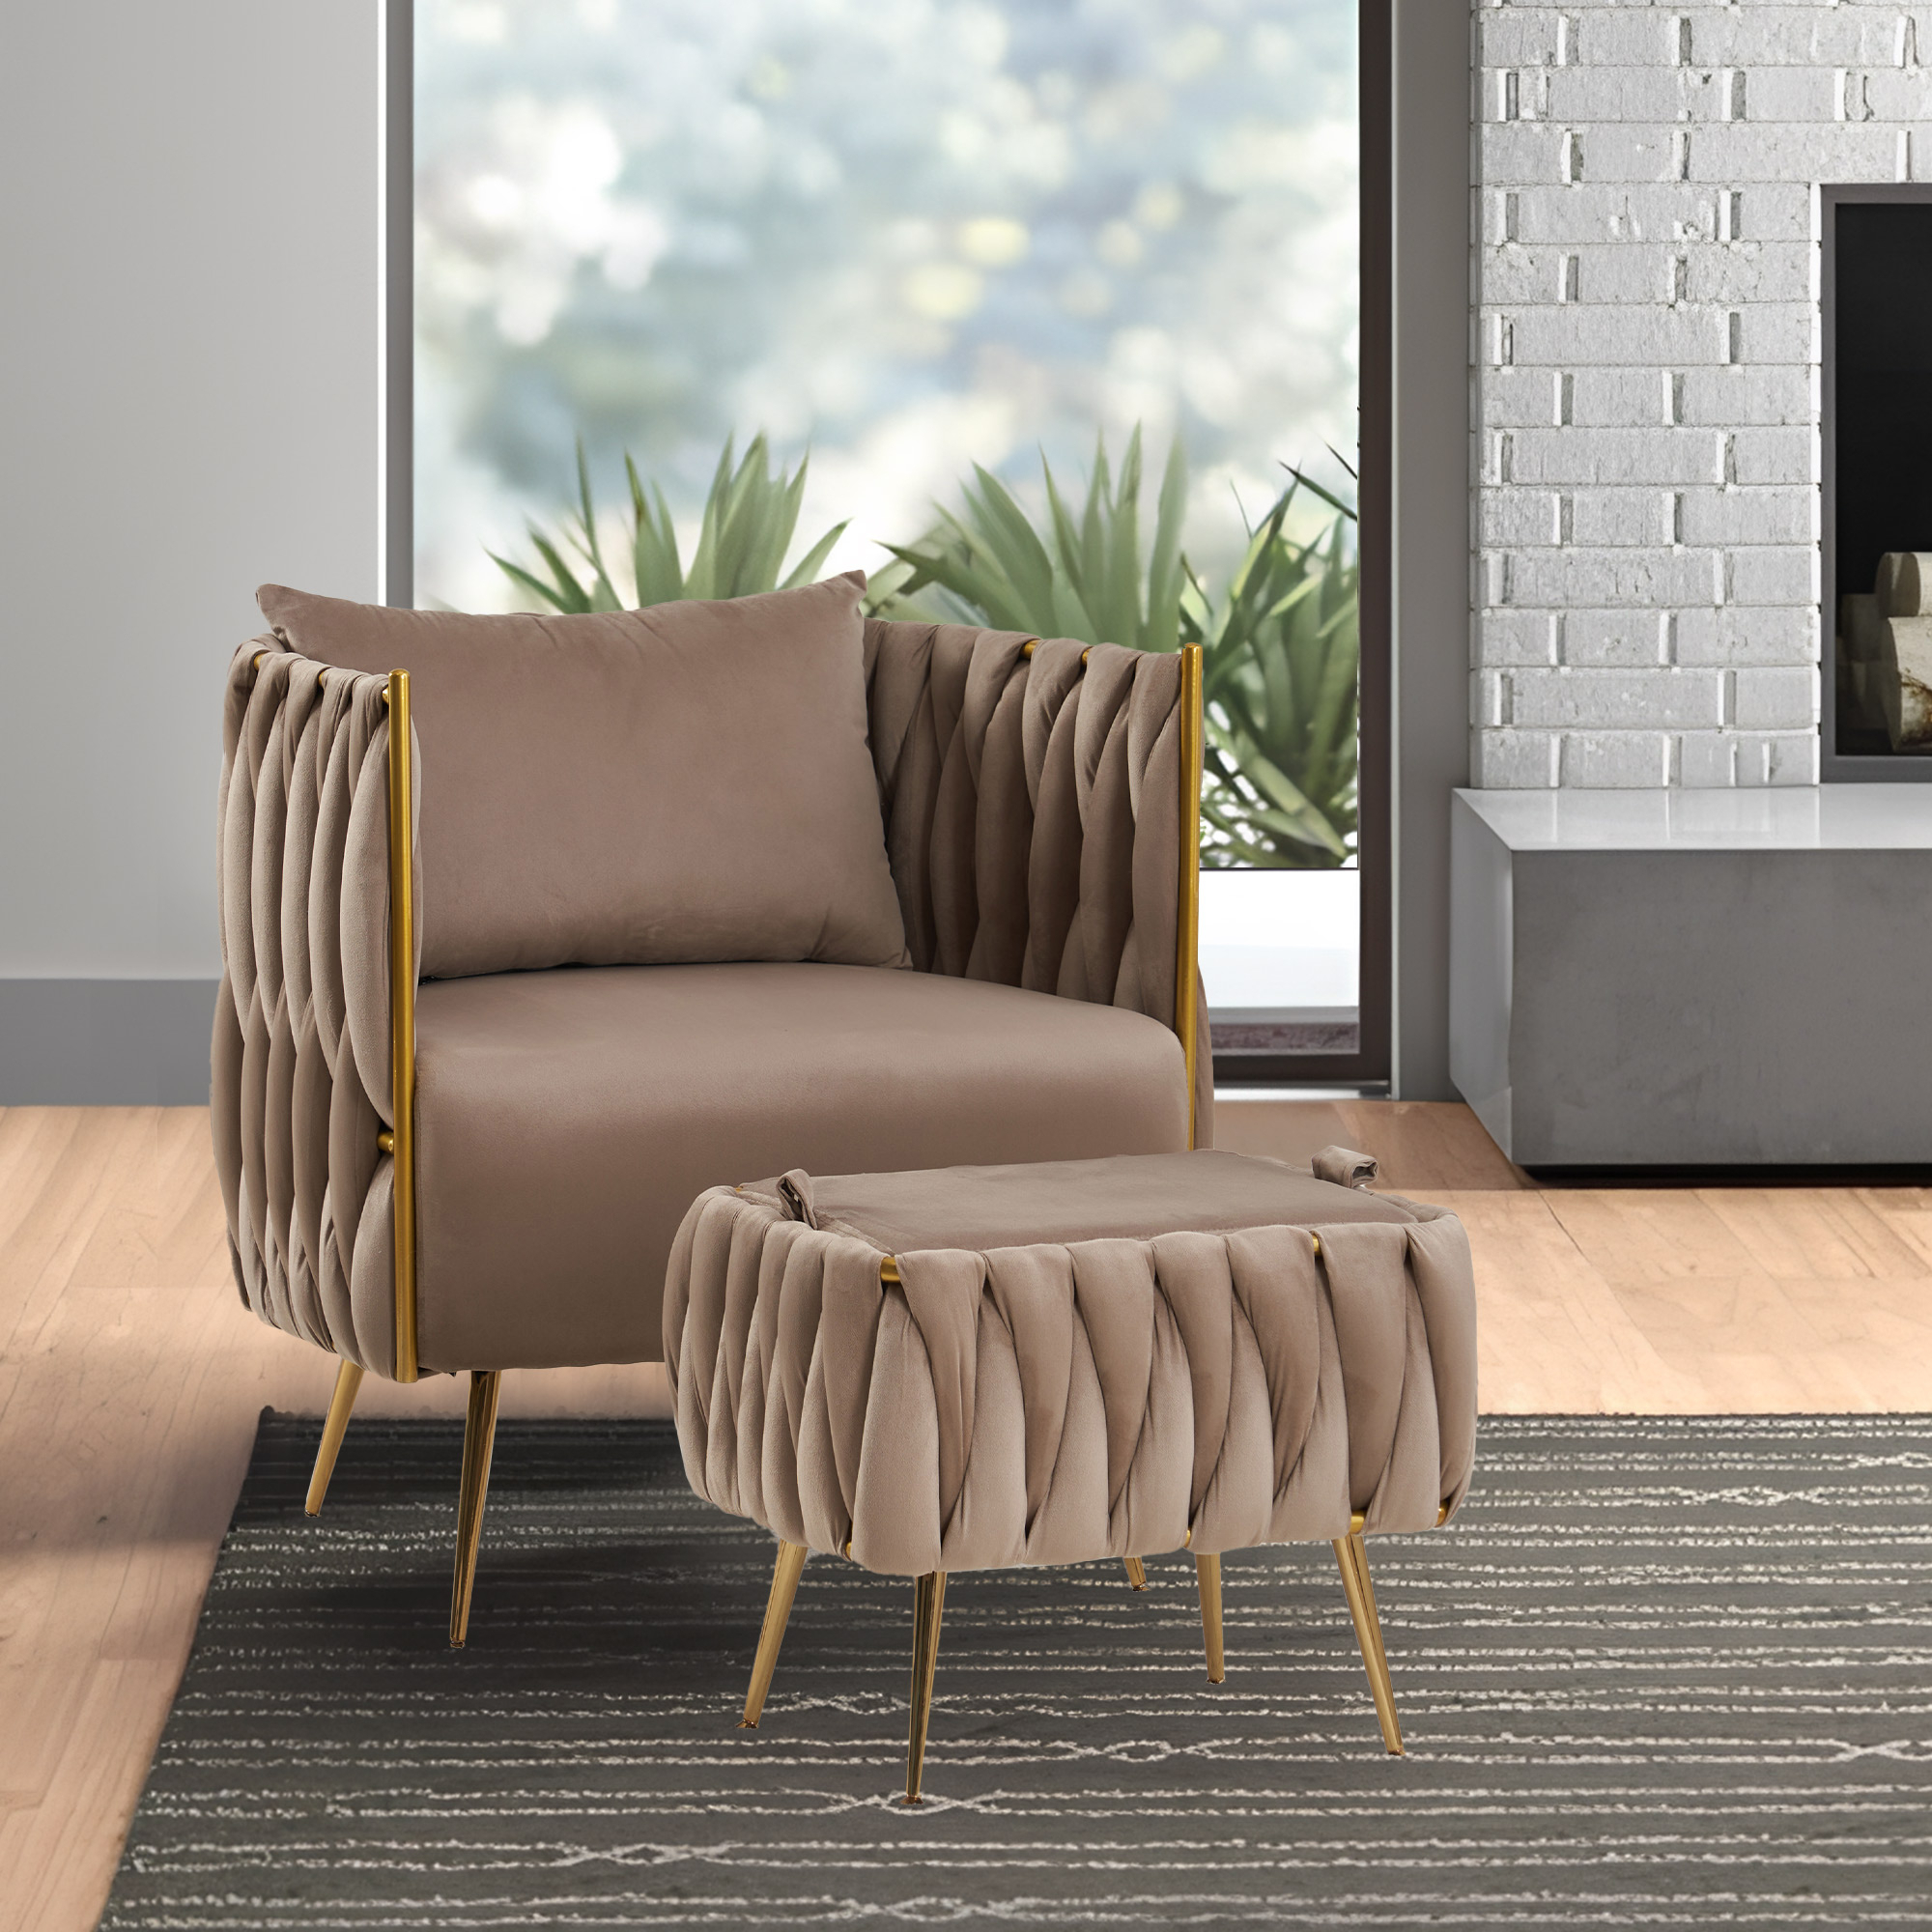 Modern Velvet Accent Chairs Hand Weaving Accent Upholstered Side Chair With Ottoman Footrest, Barrel Chair For Living Room